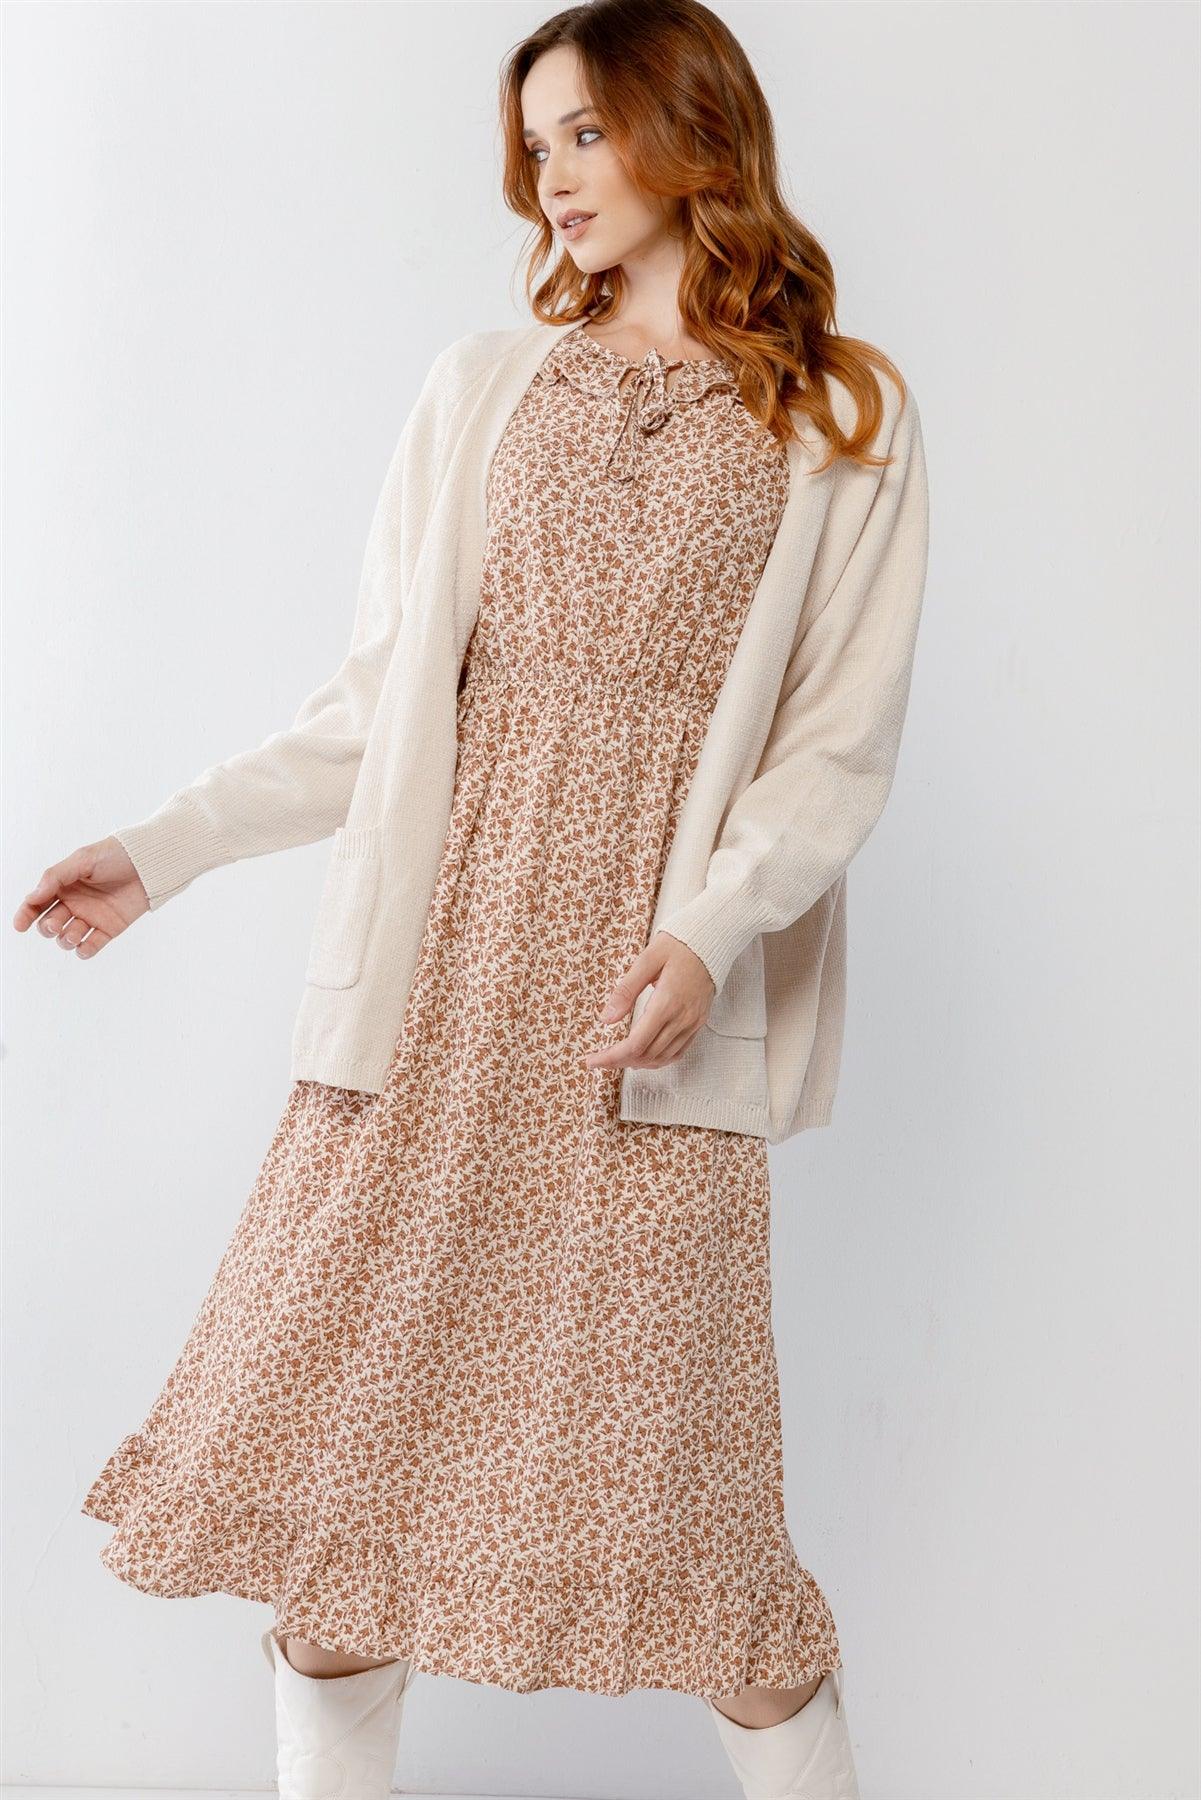 Cream Knit Two Pocket Long Sleeve Open Front Cardigan /2-2-2